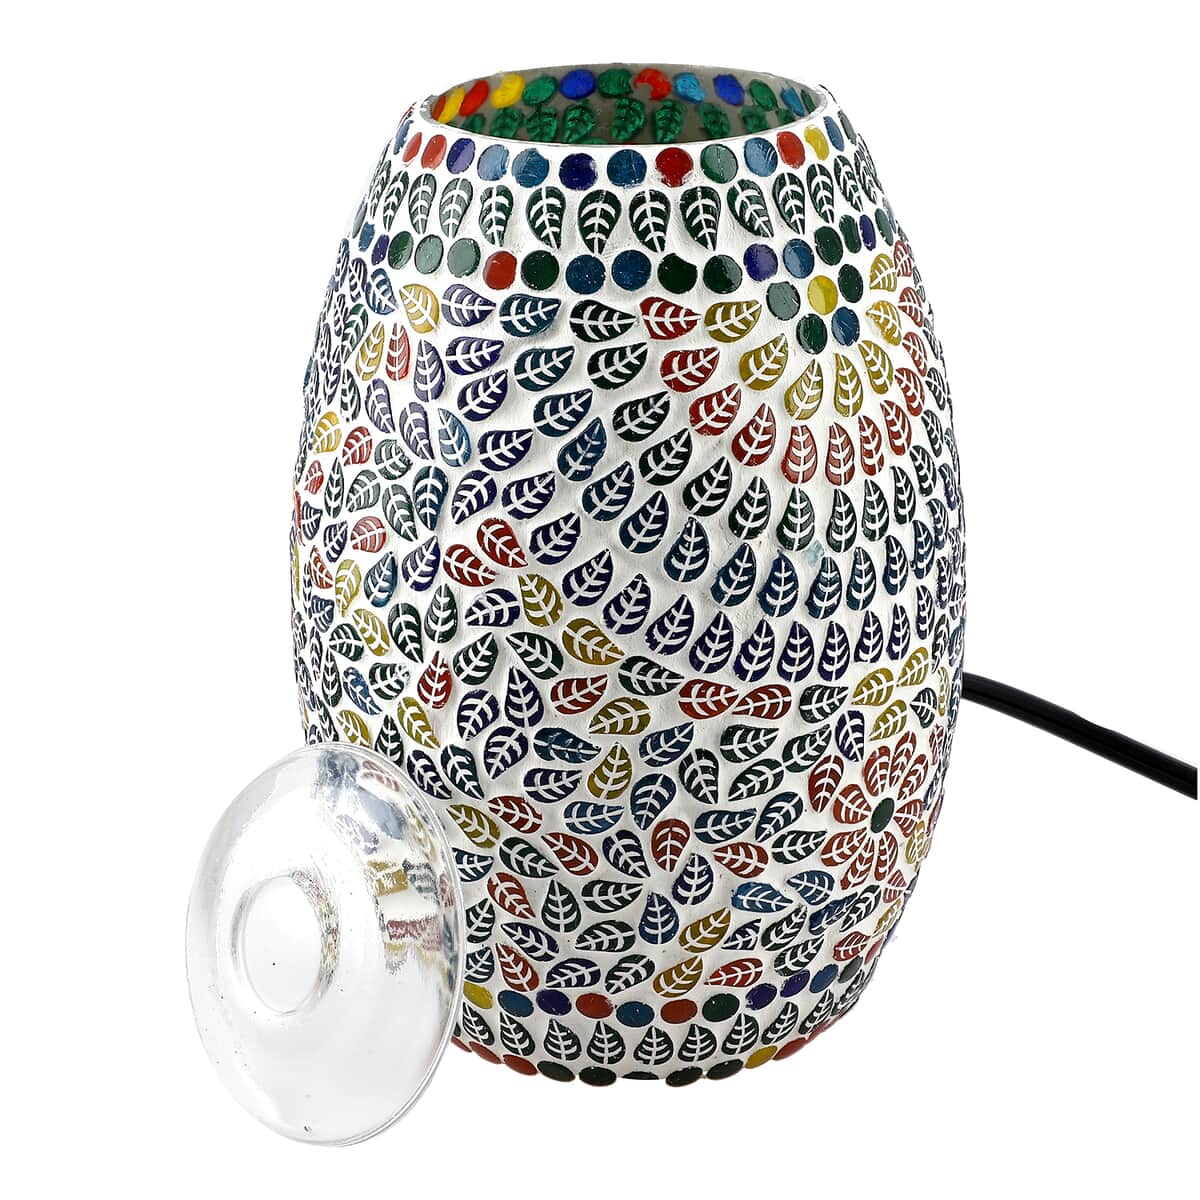 "Handcrafted Mosaic Table lamp with aroma oil bottle 5ml x 8 pcswith UL Certified Color: Multi Size: 4.5x8 Inch" image number 2